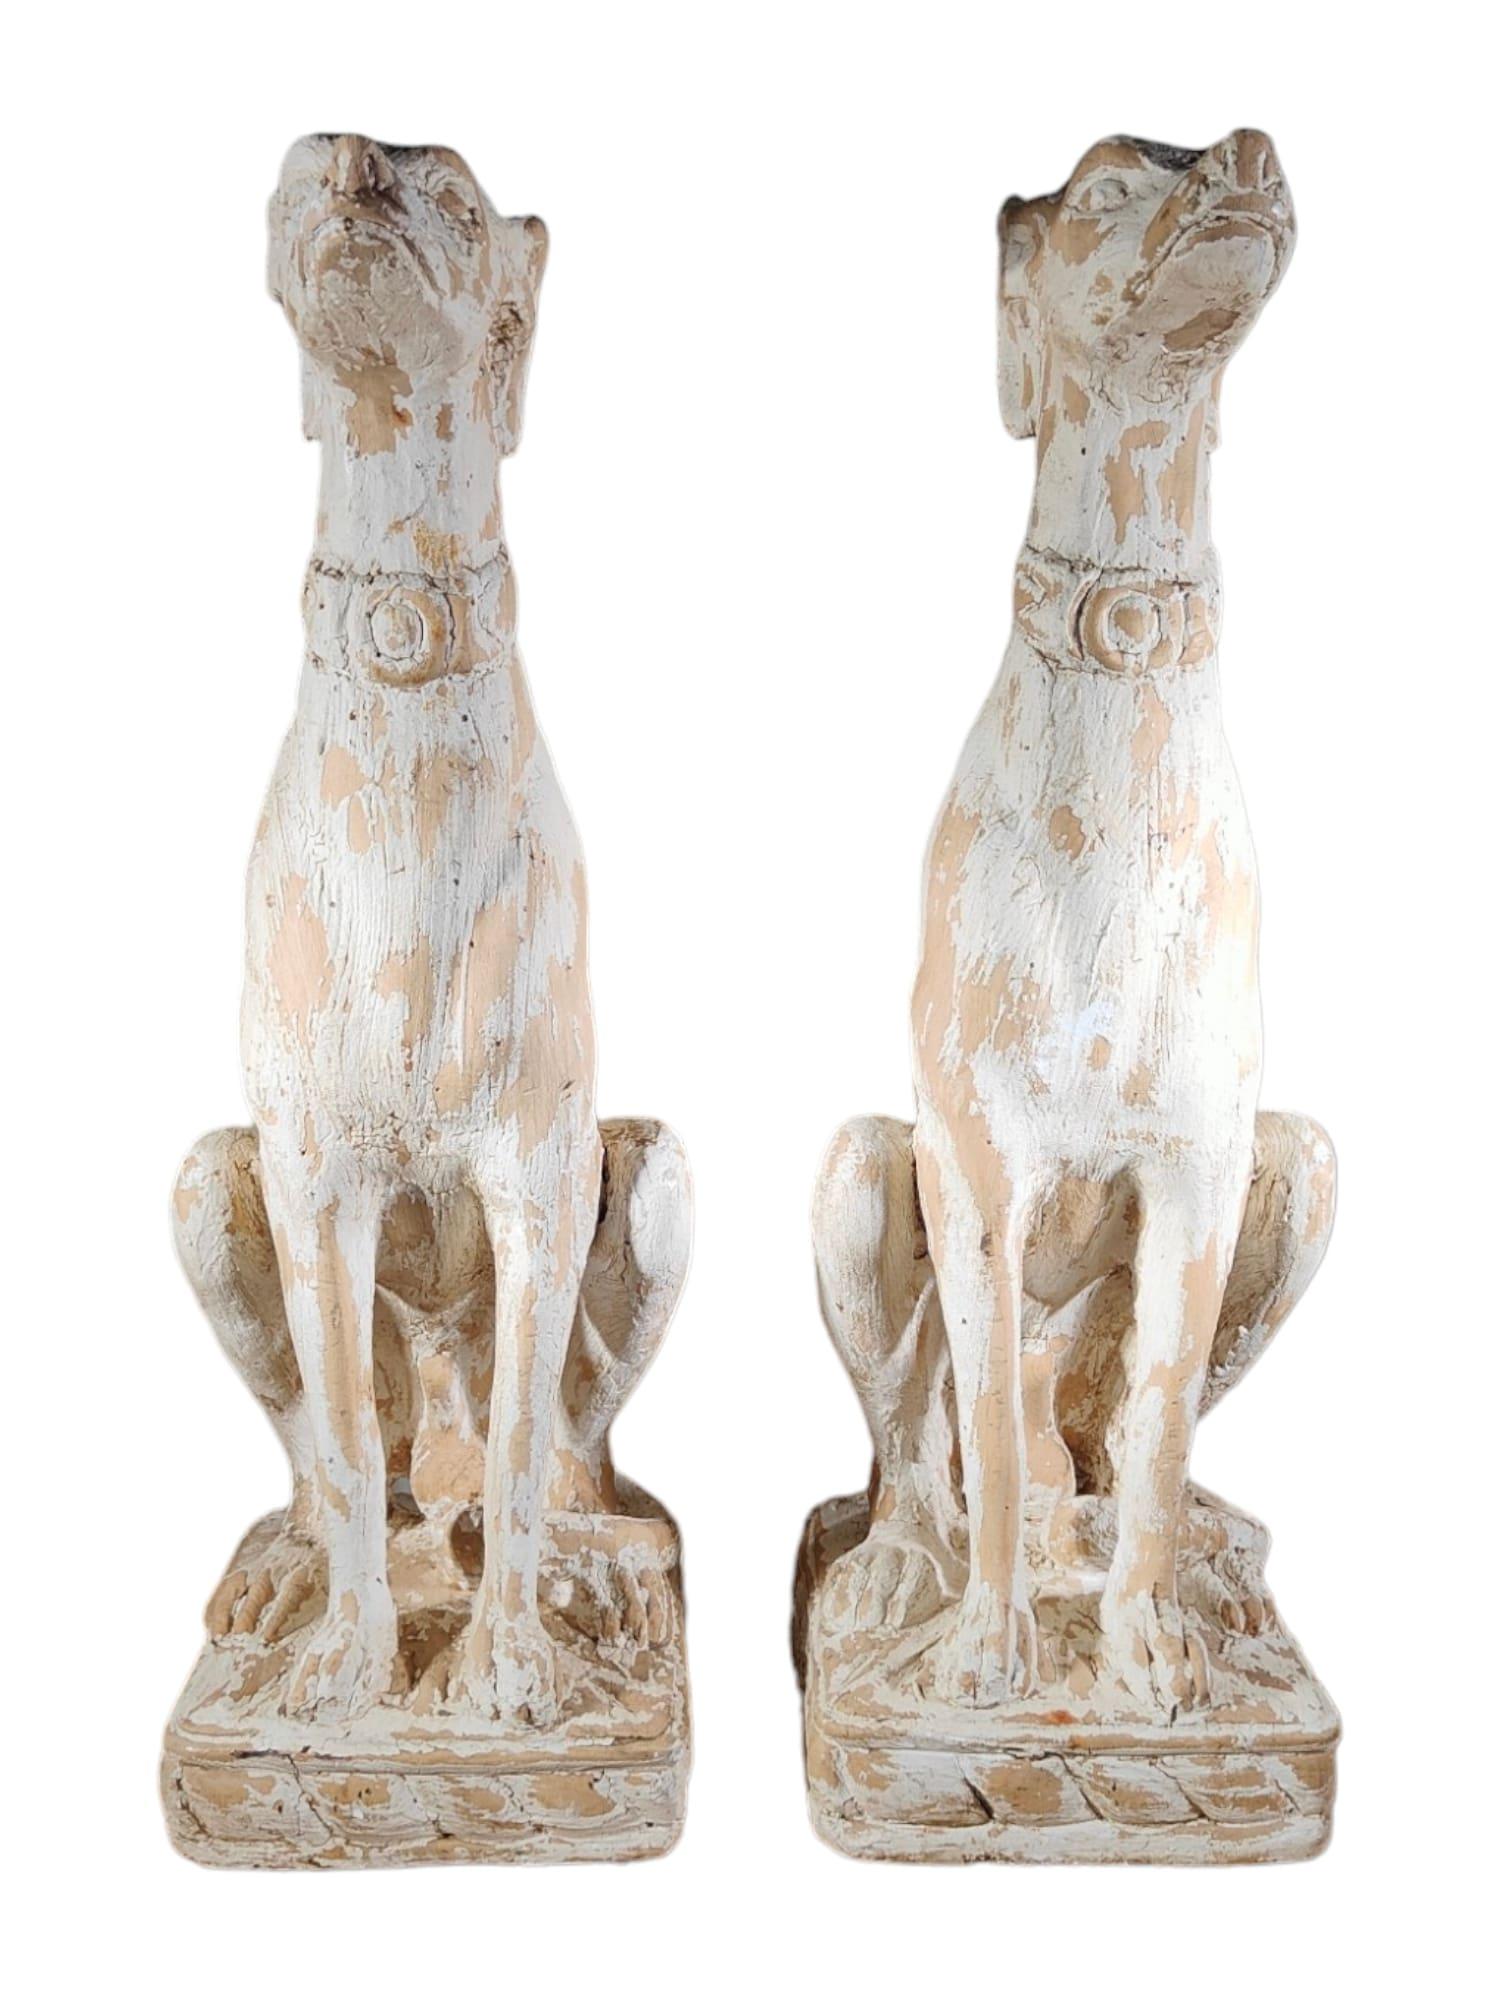 Elevate your space with the grace and charm of this decorative pair of Italian Greyhounds. Crafted from solid carved wood and adorned with remnants of white paint, these statues are a testament to exquisite craftsmanship and timeless elegance.

Key